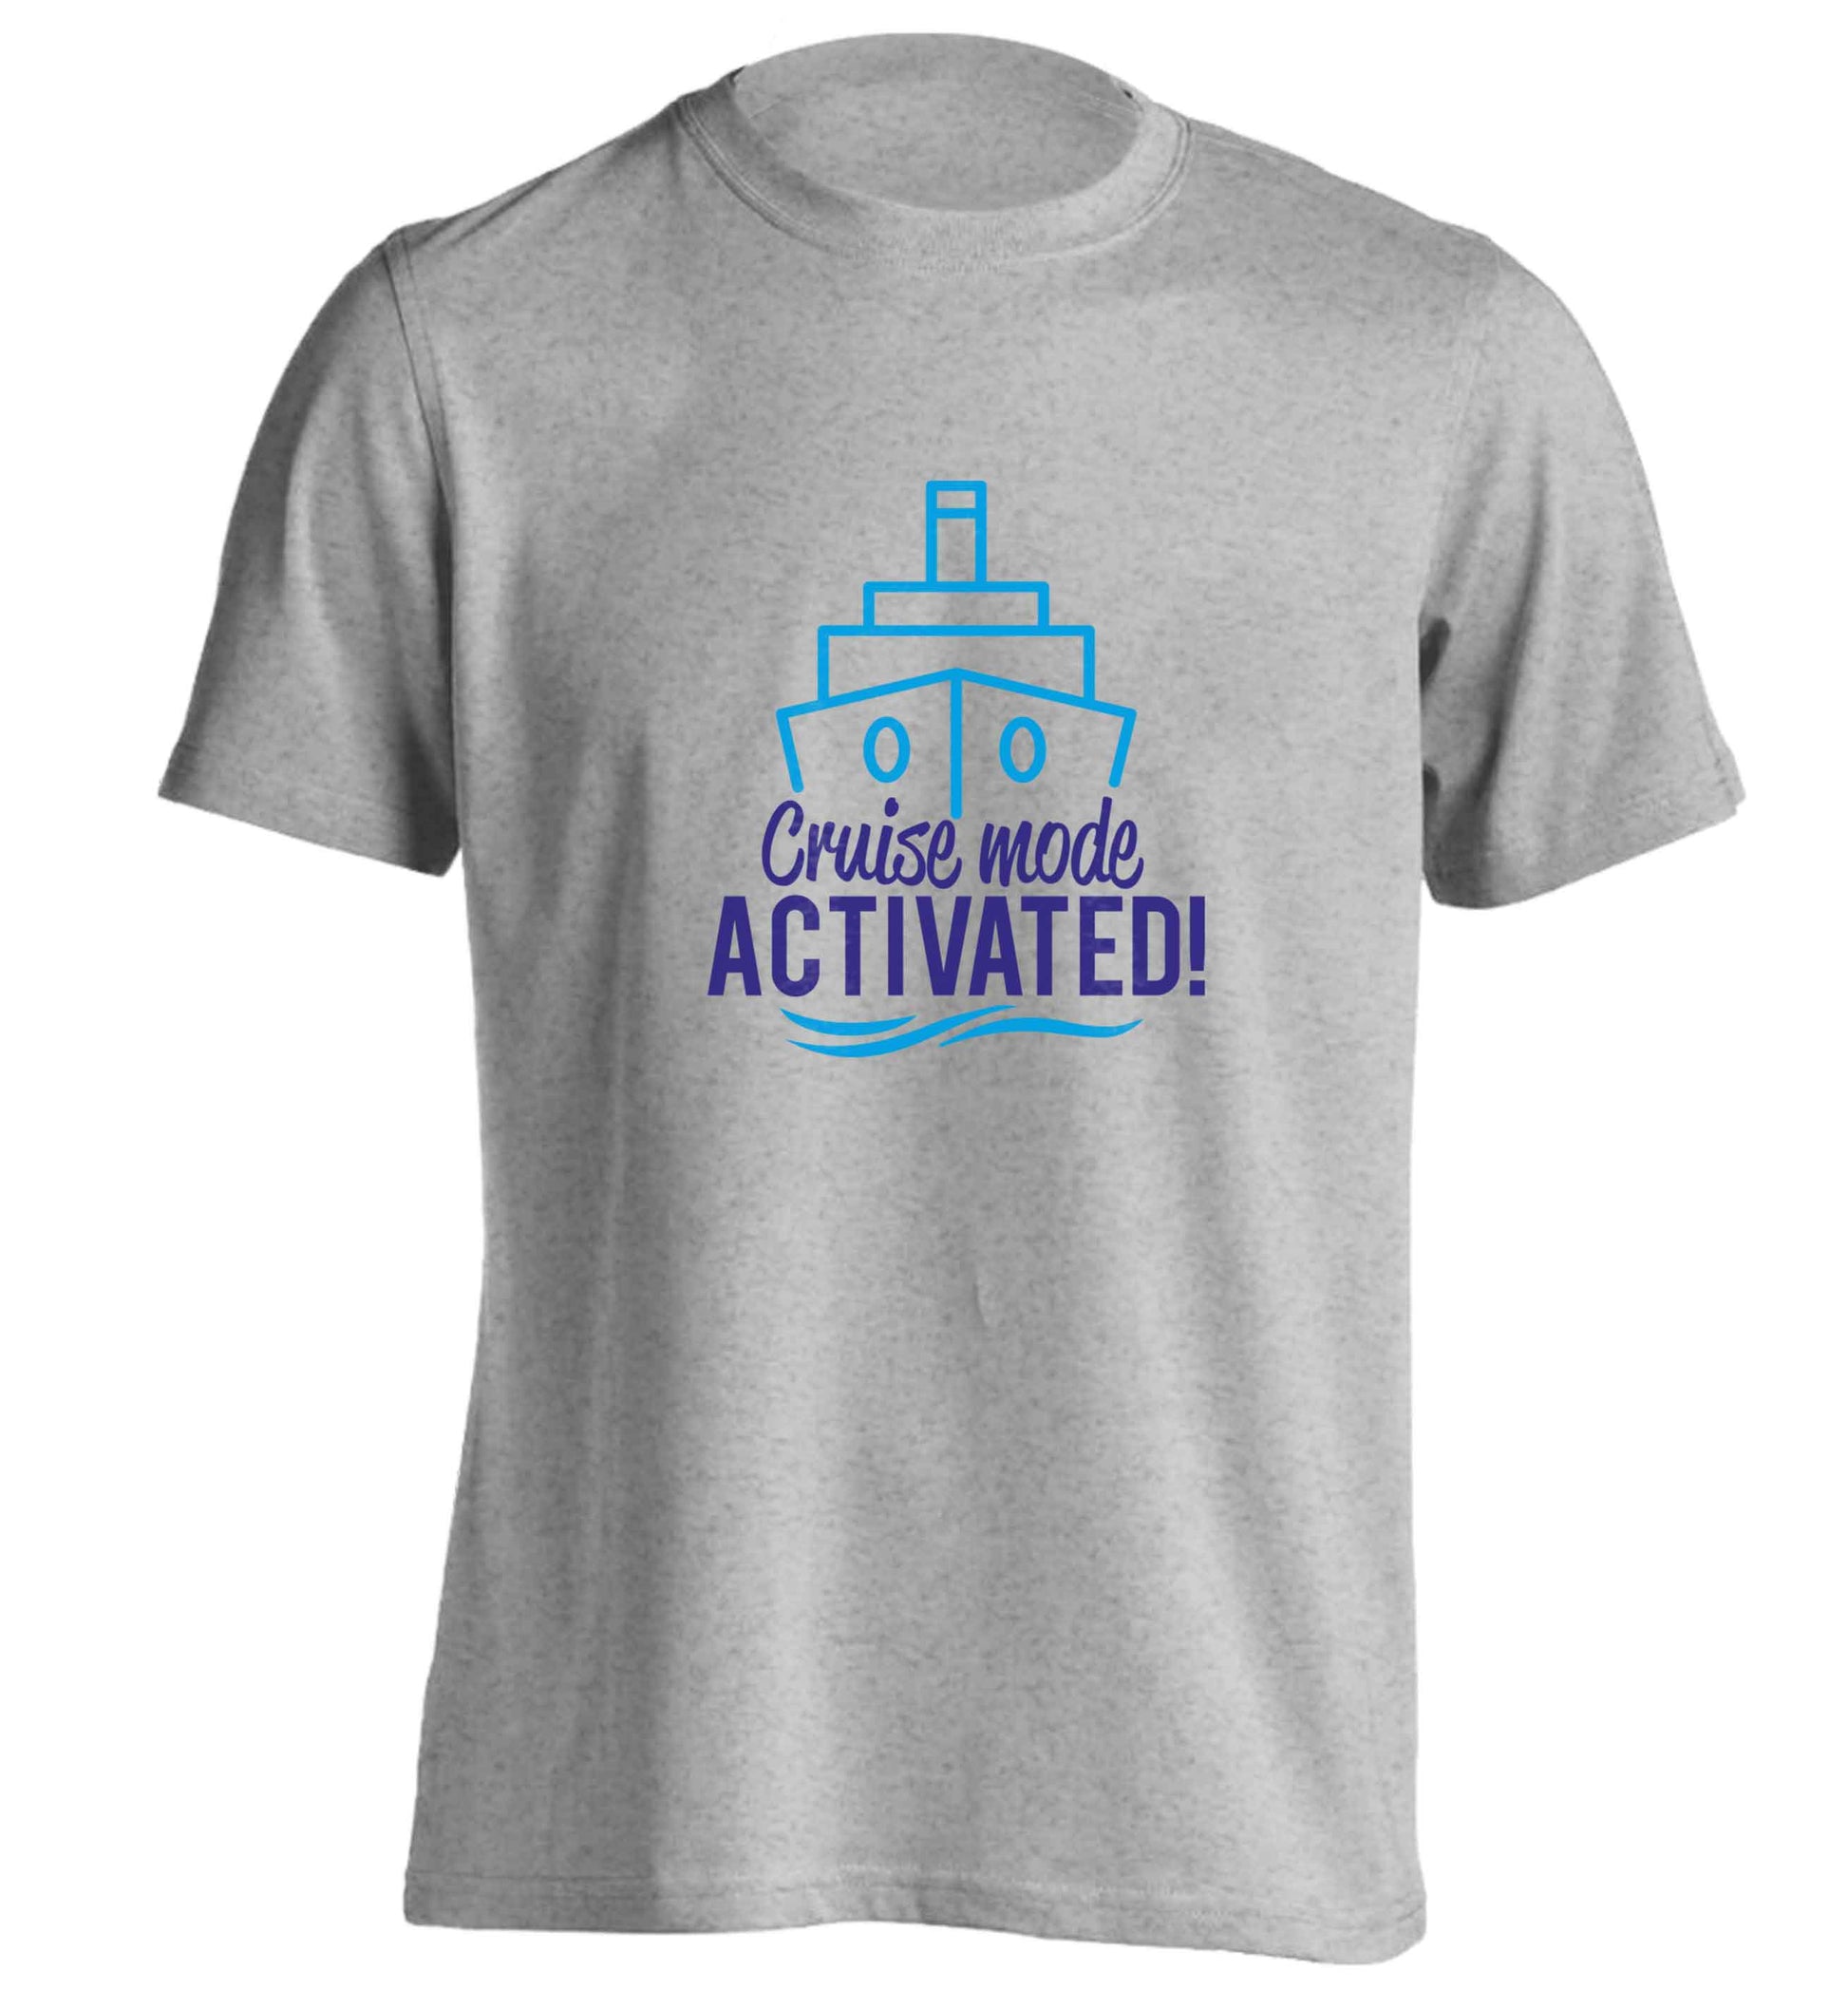 Cruise mode activated adults unisex grey Tshirt 2XL